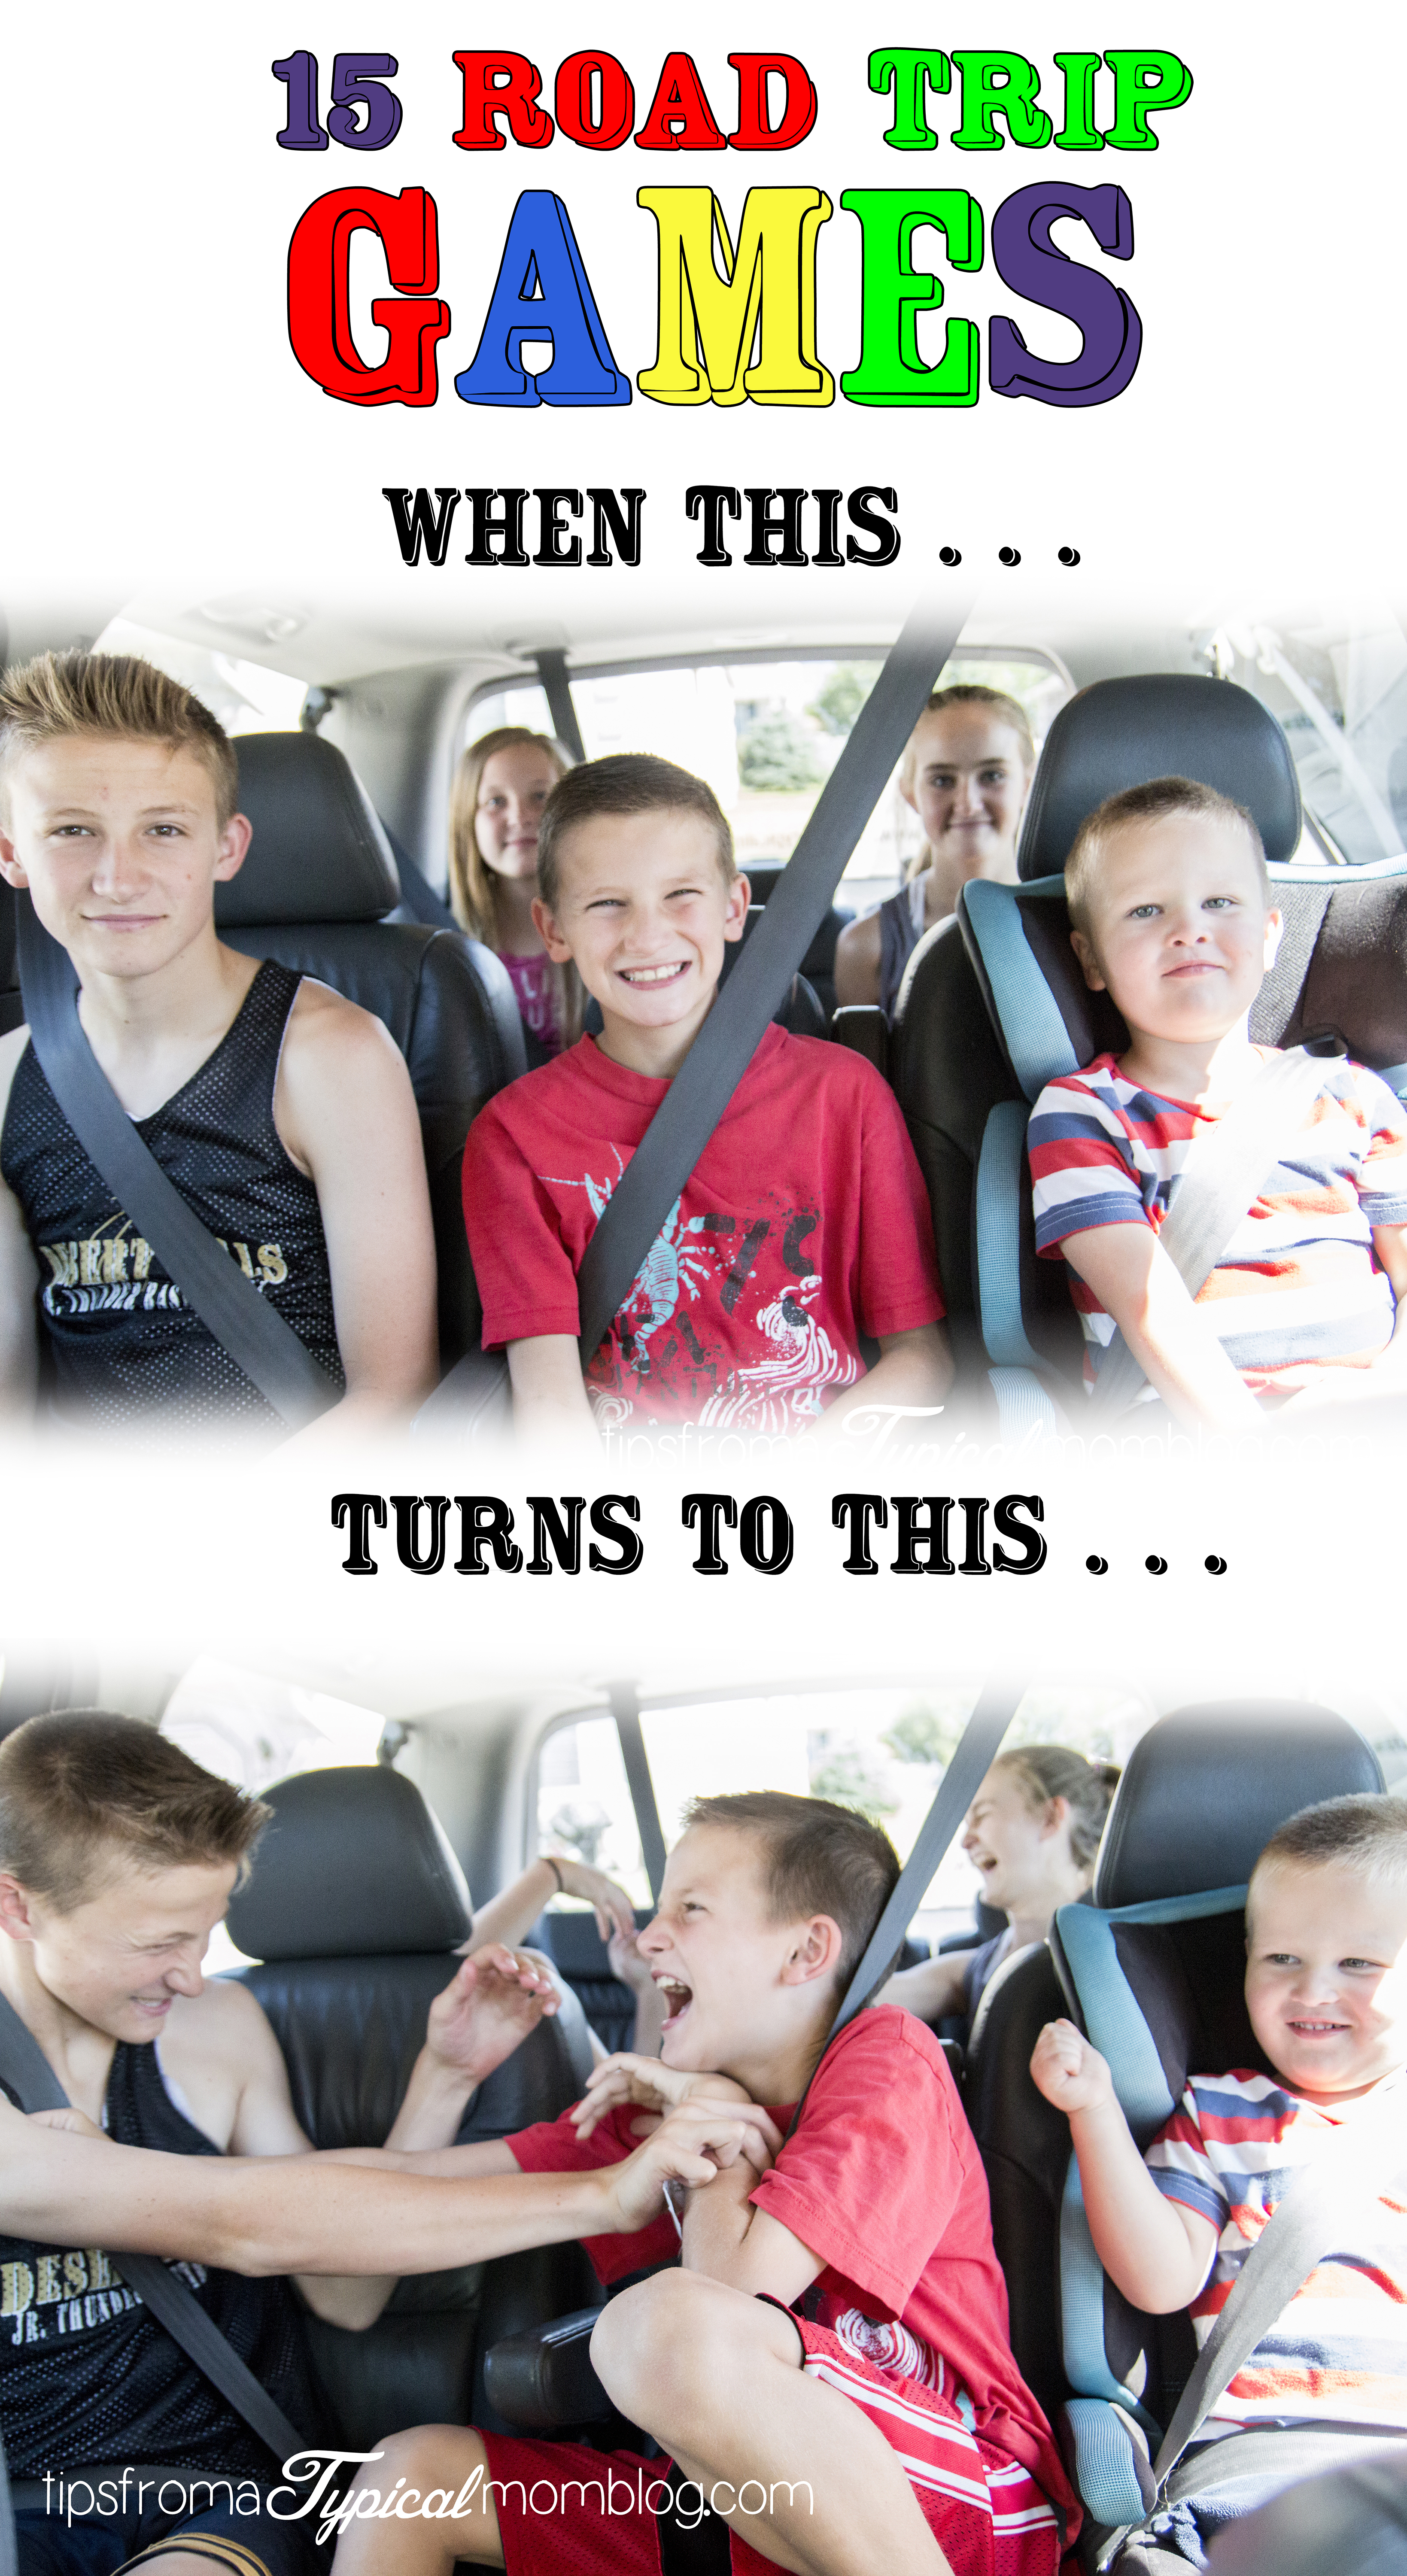 15 Road Trip Games For Kids To Keep Them Entertained - SoCal Field Trips